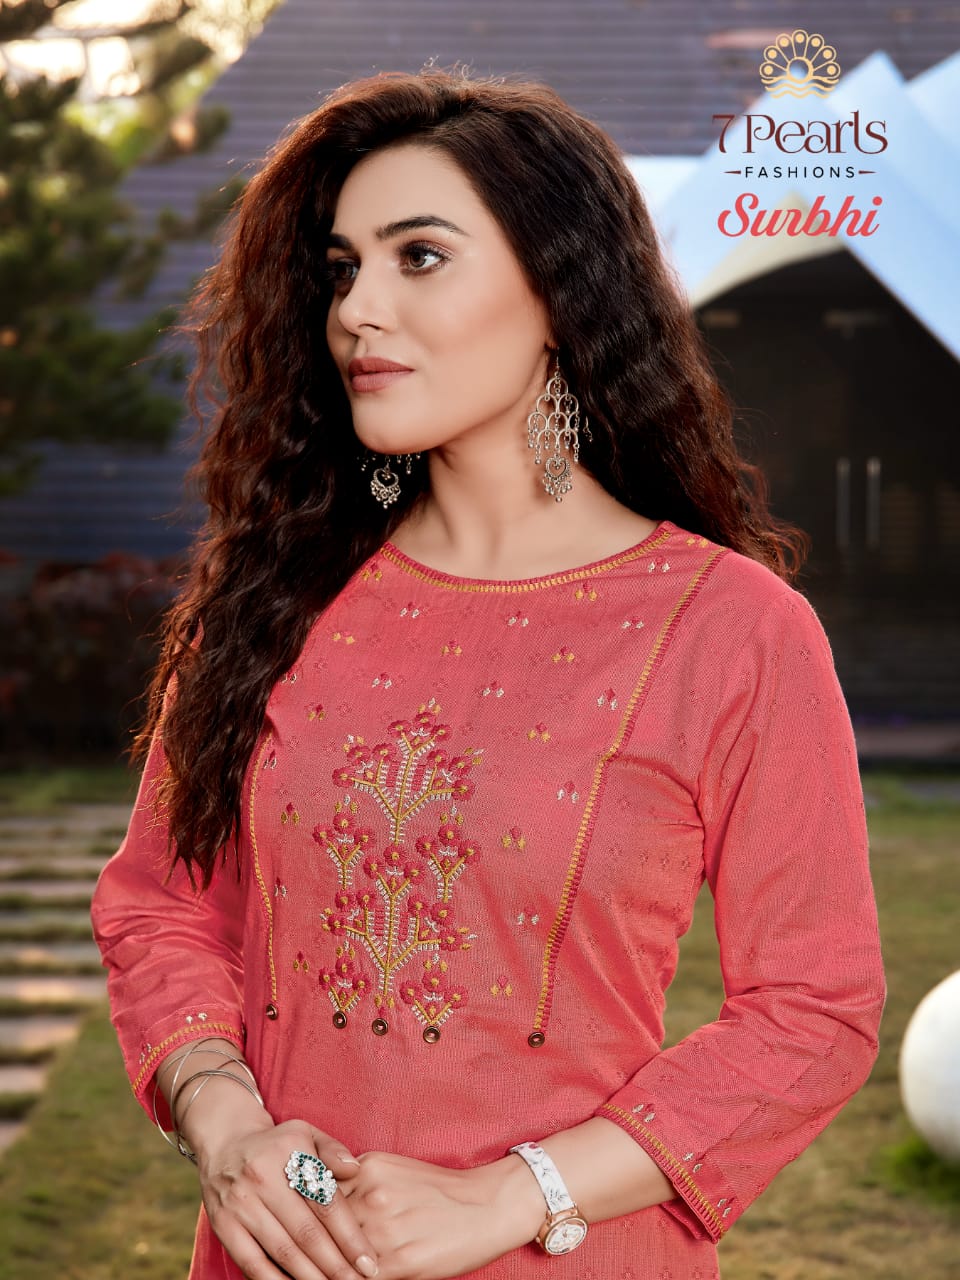 7 pearls surbhi cotton authentic fabric kurti with pant catalog